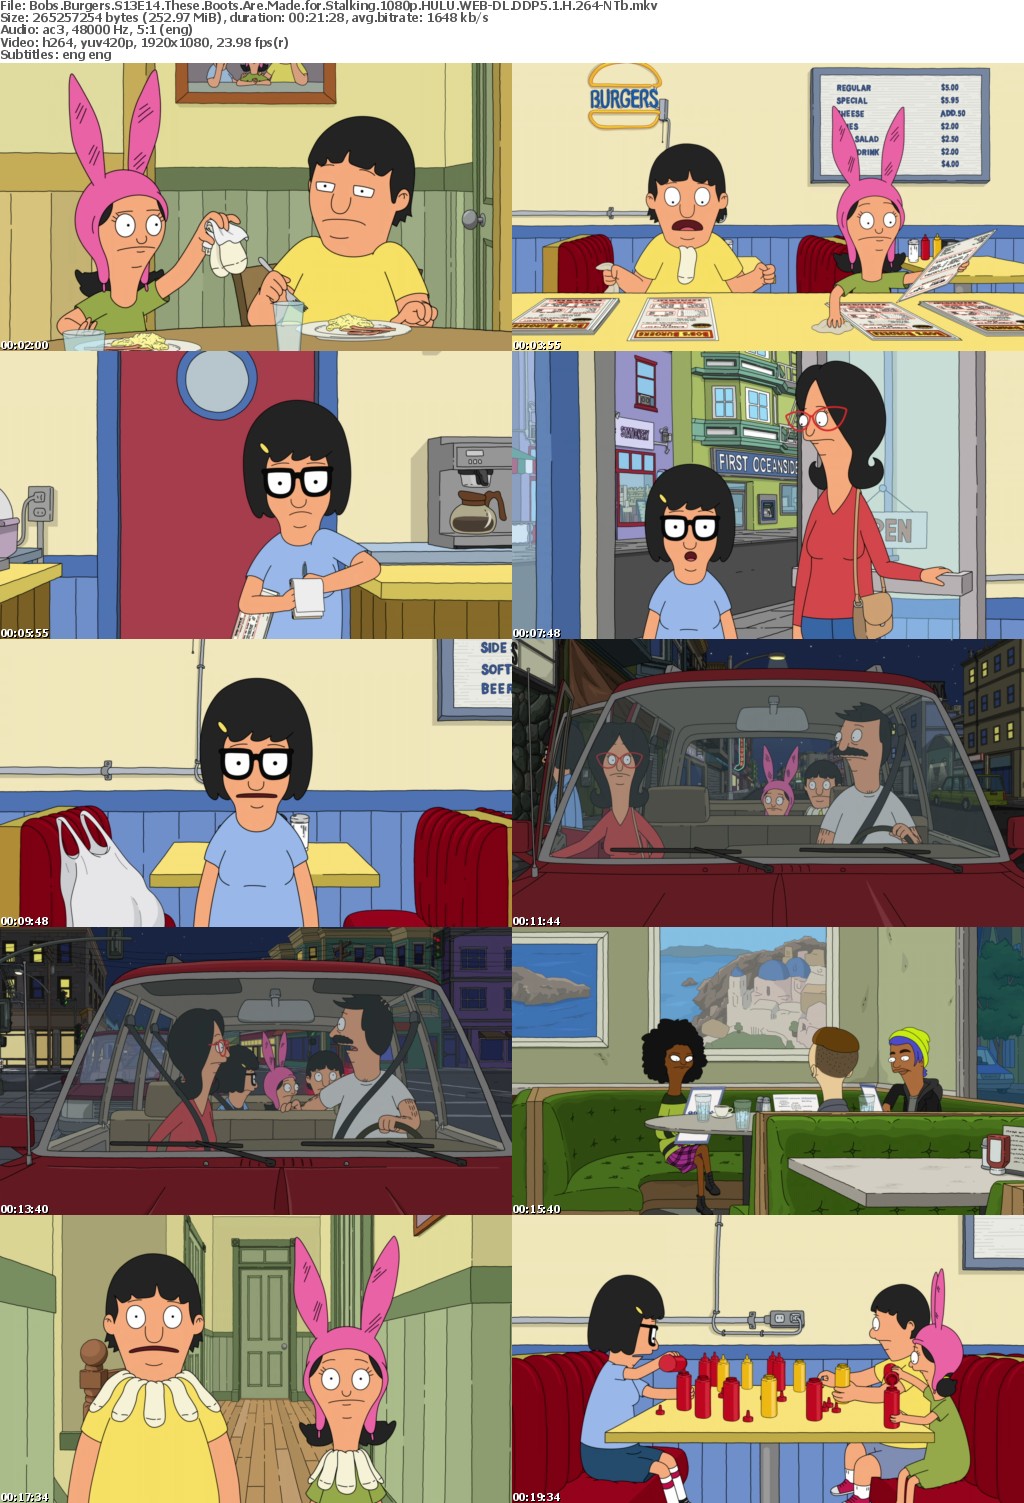 Bobs Burgers S13E14 These Boots Are Made for Stalking 1080p HULU WEBRip DDP5 1 x264-NTb